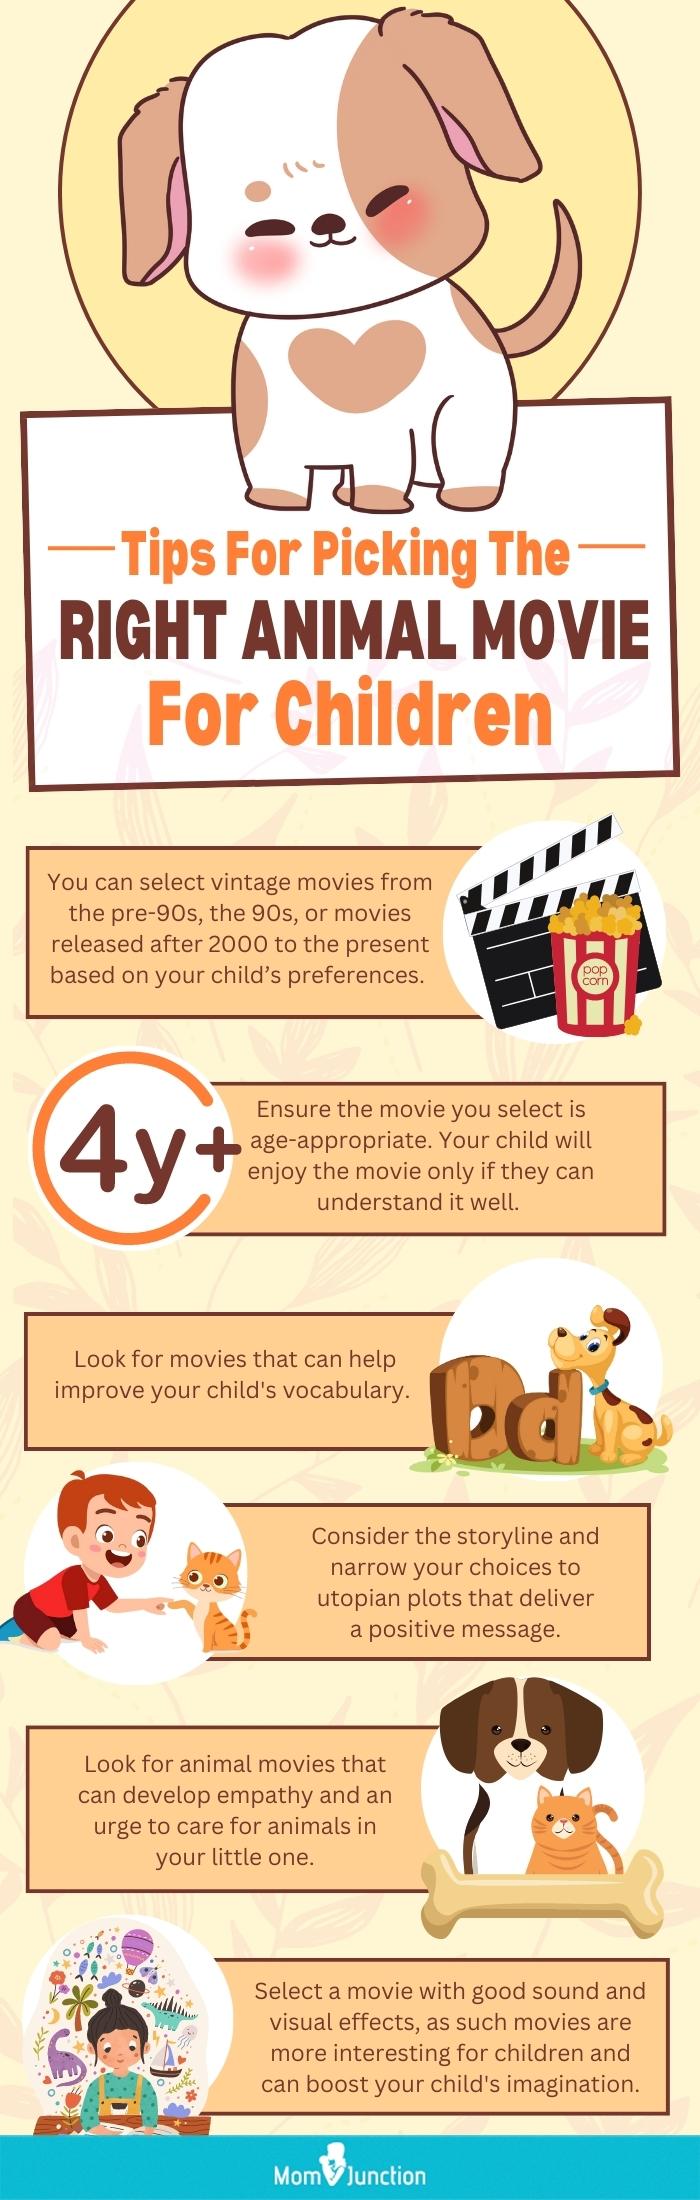 Tips For Picking The Right Animal Movie For Children (infographic)